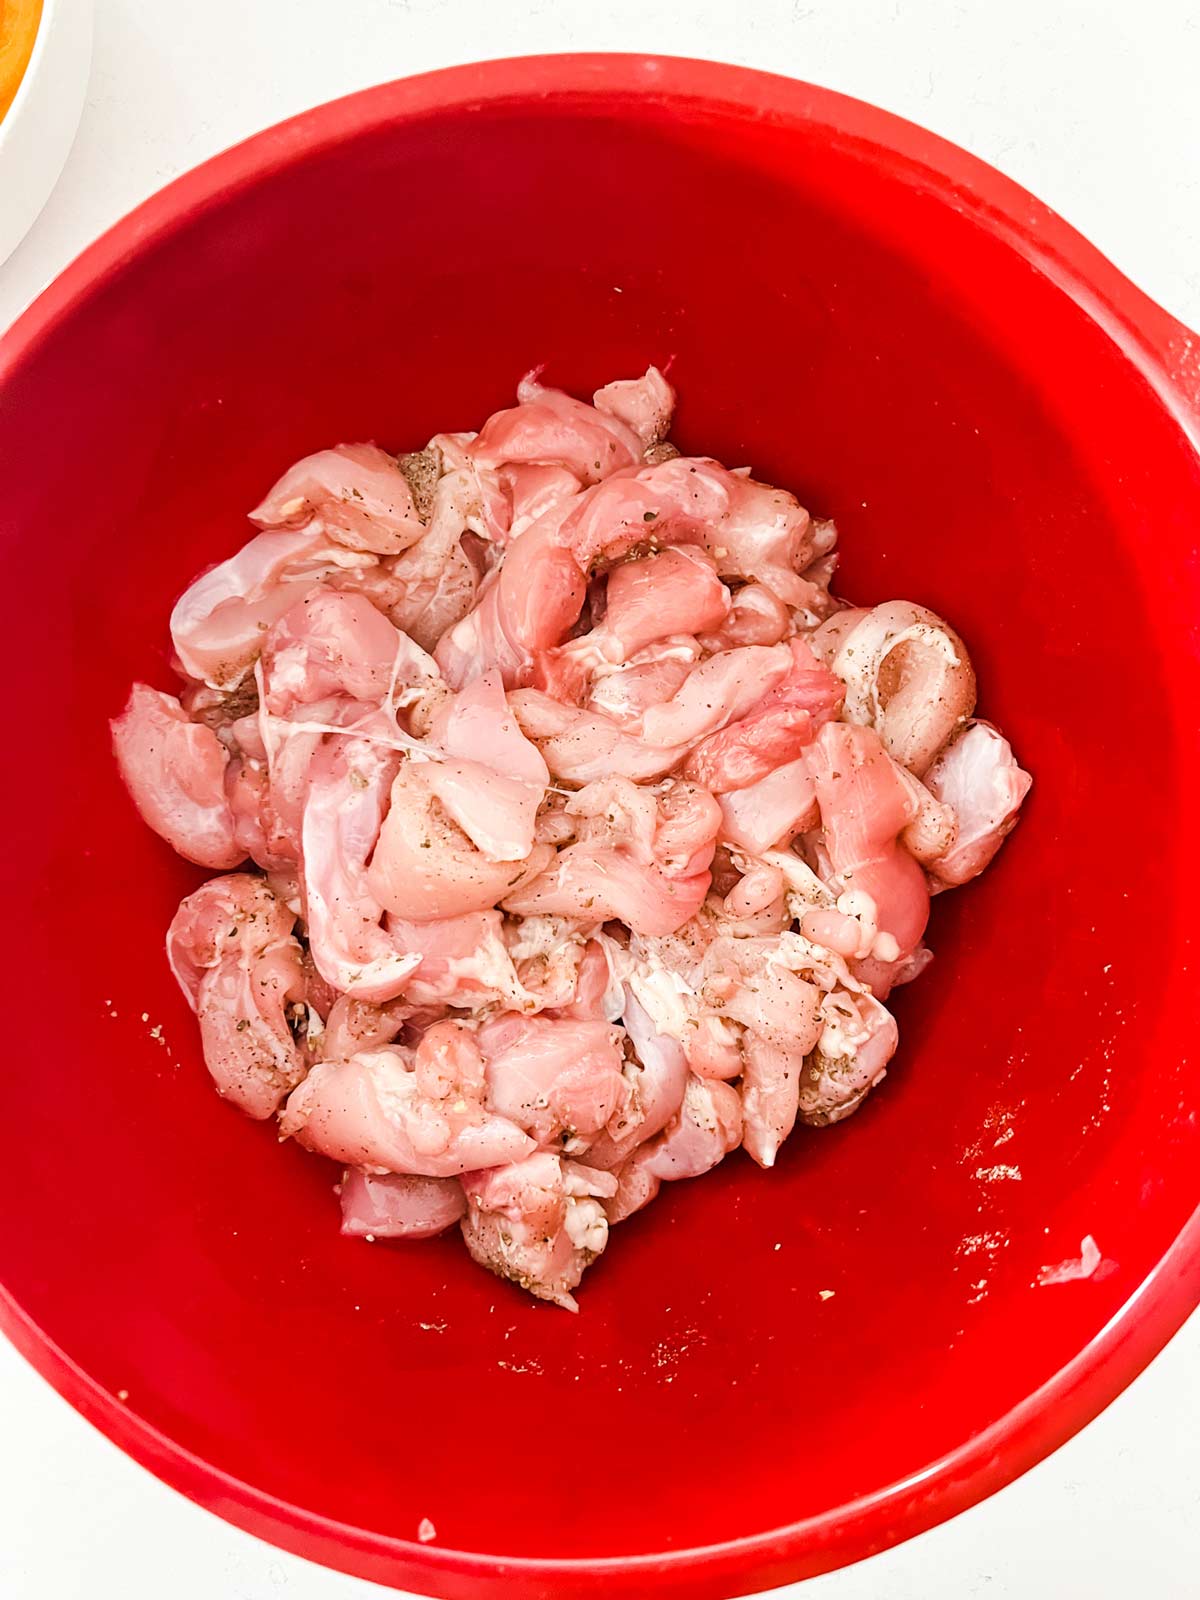 Seasoned sliced chicken thighs in a red bowl.